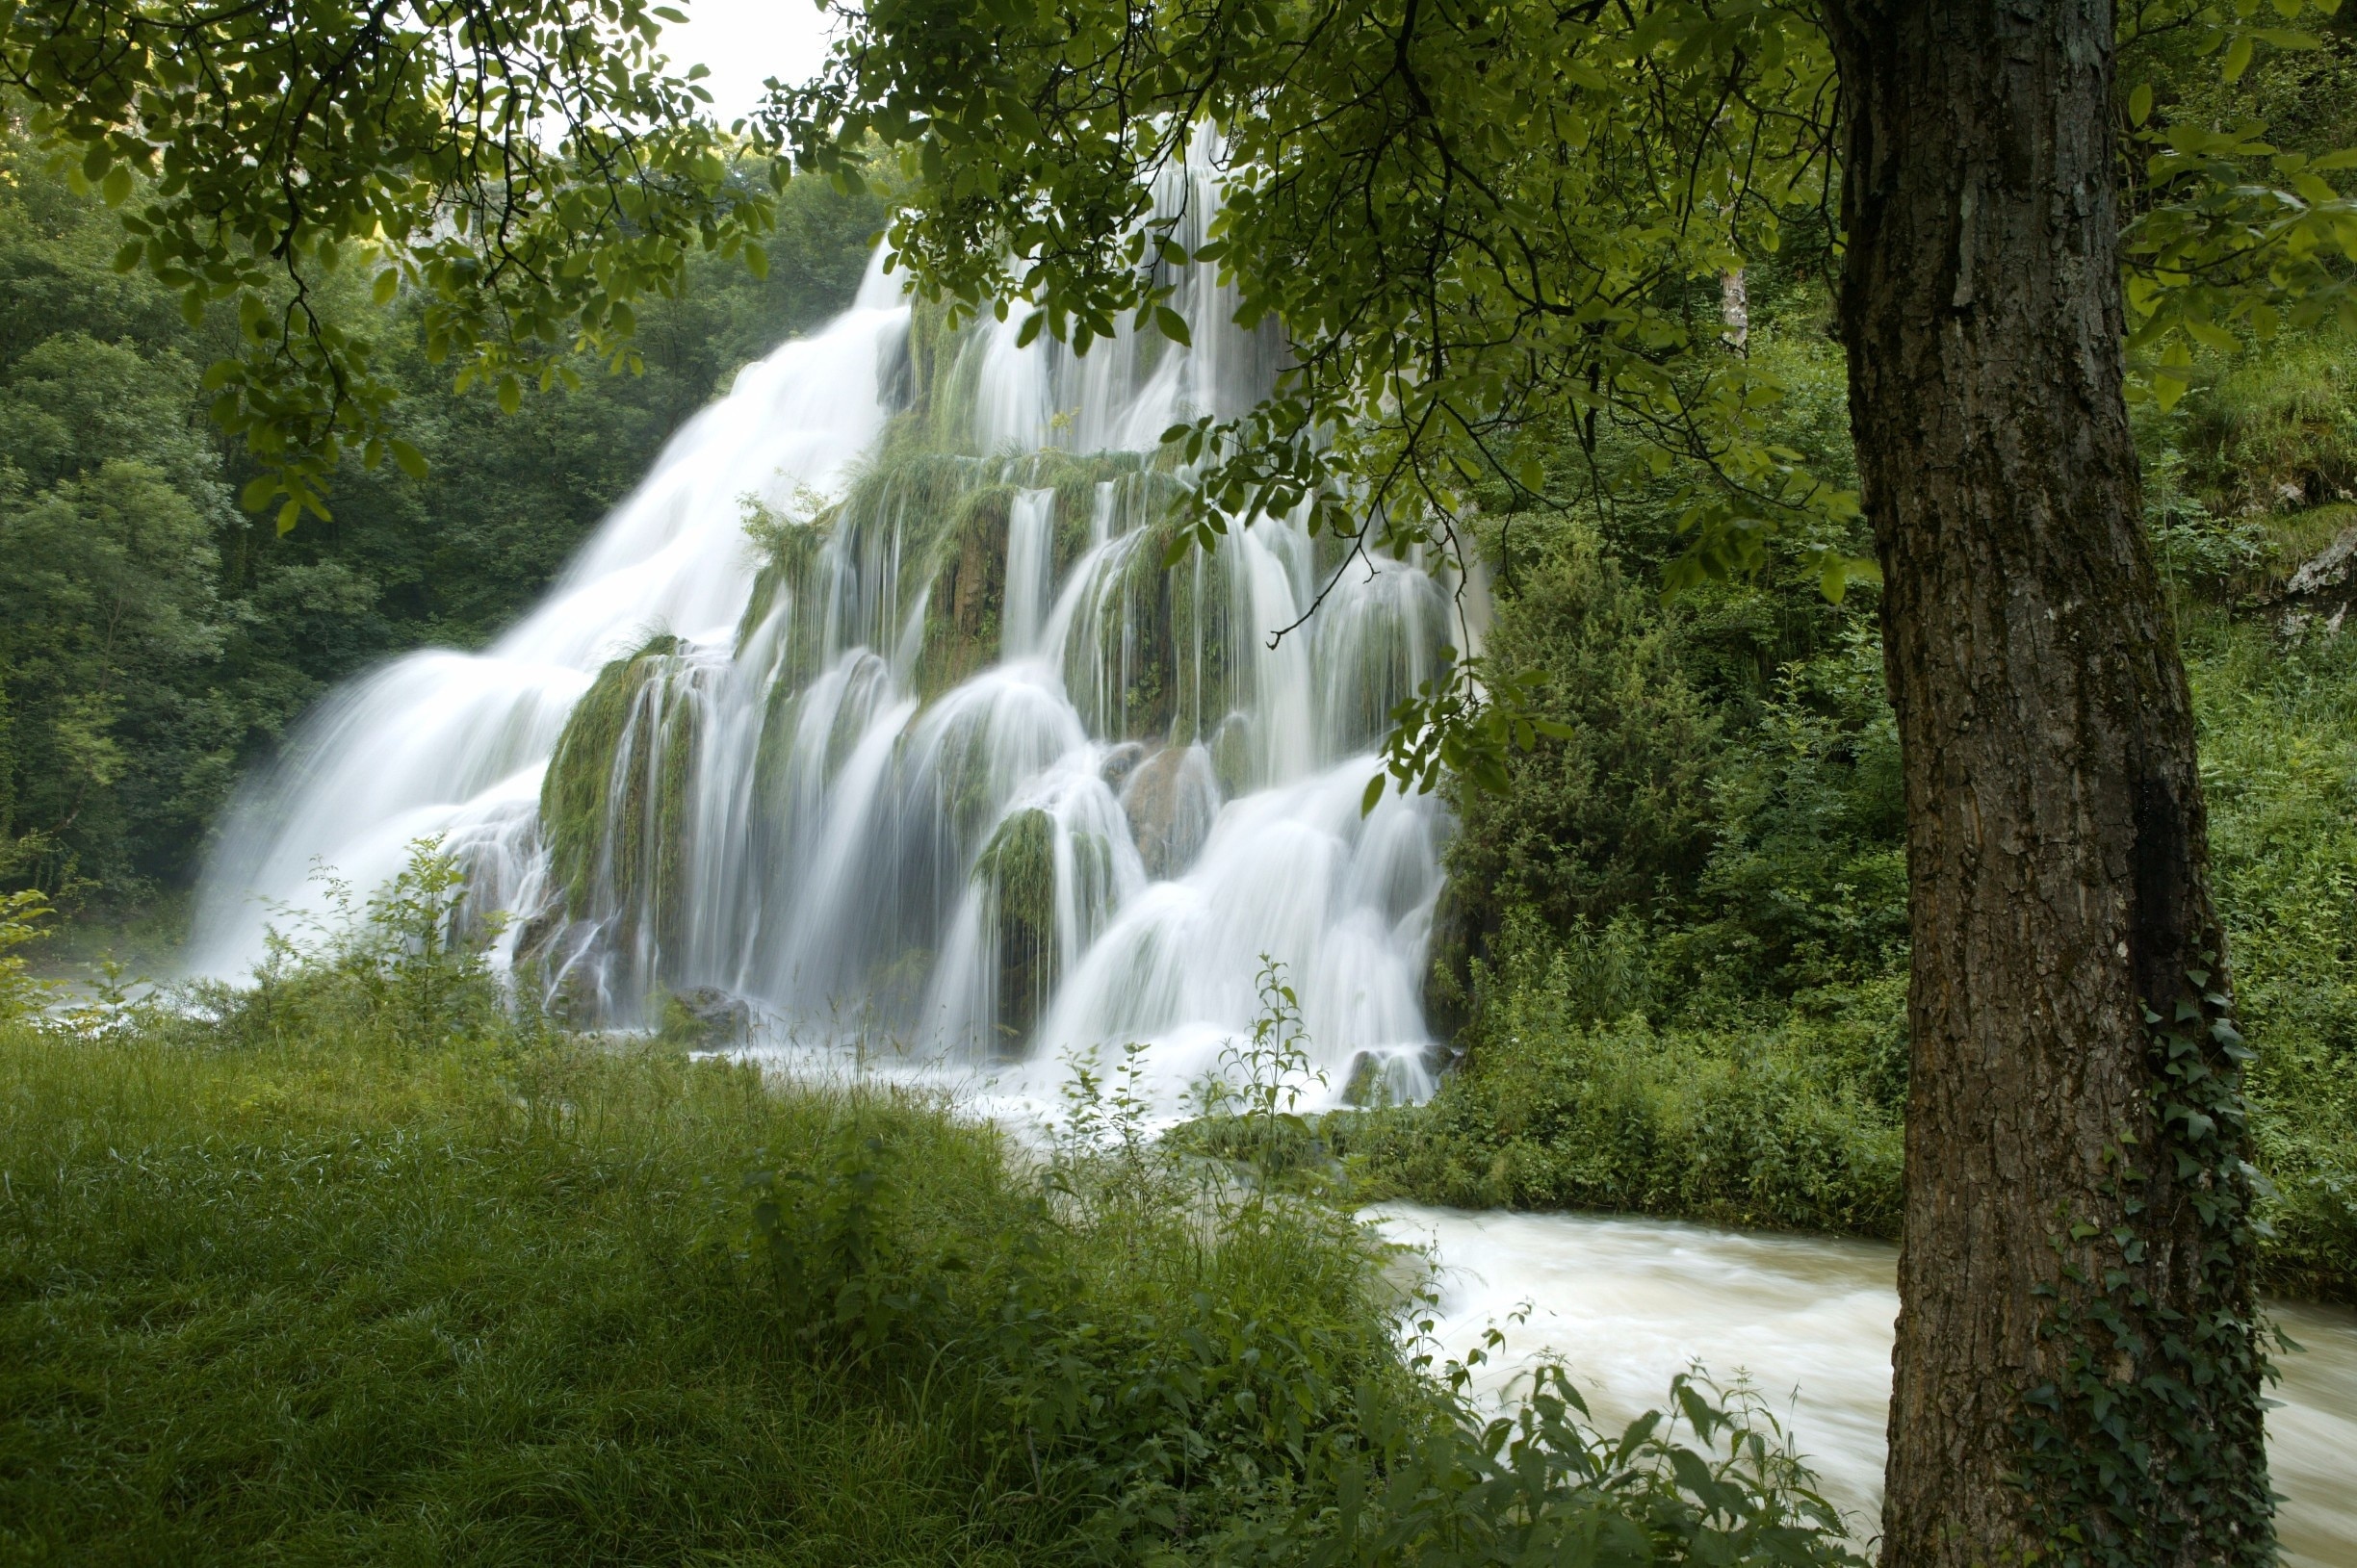 Superb Waterfalls!
Check our video of this amazing place
http://bit.ly/CascadesduHérisson

#TheAmbientCollection #Waterlust